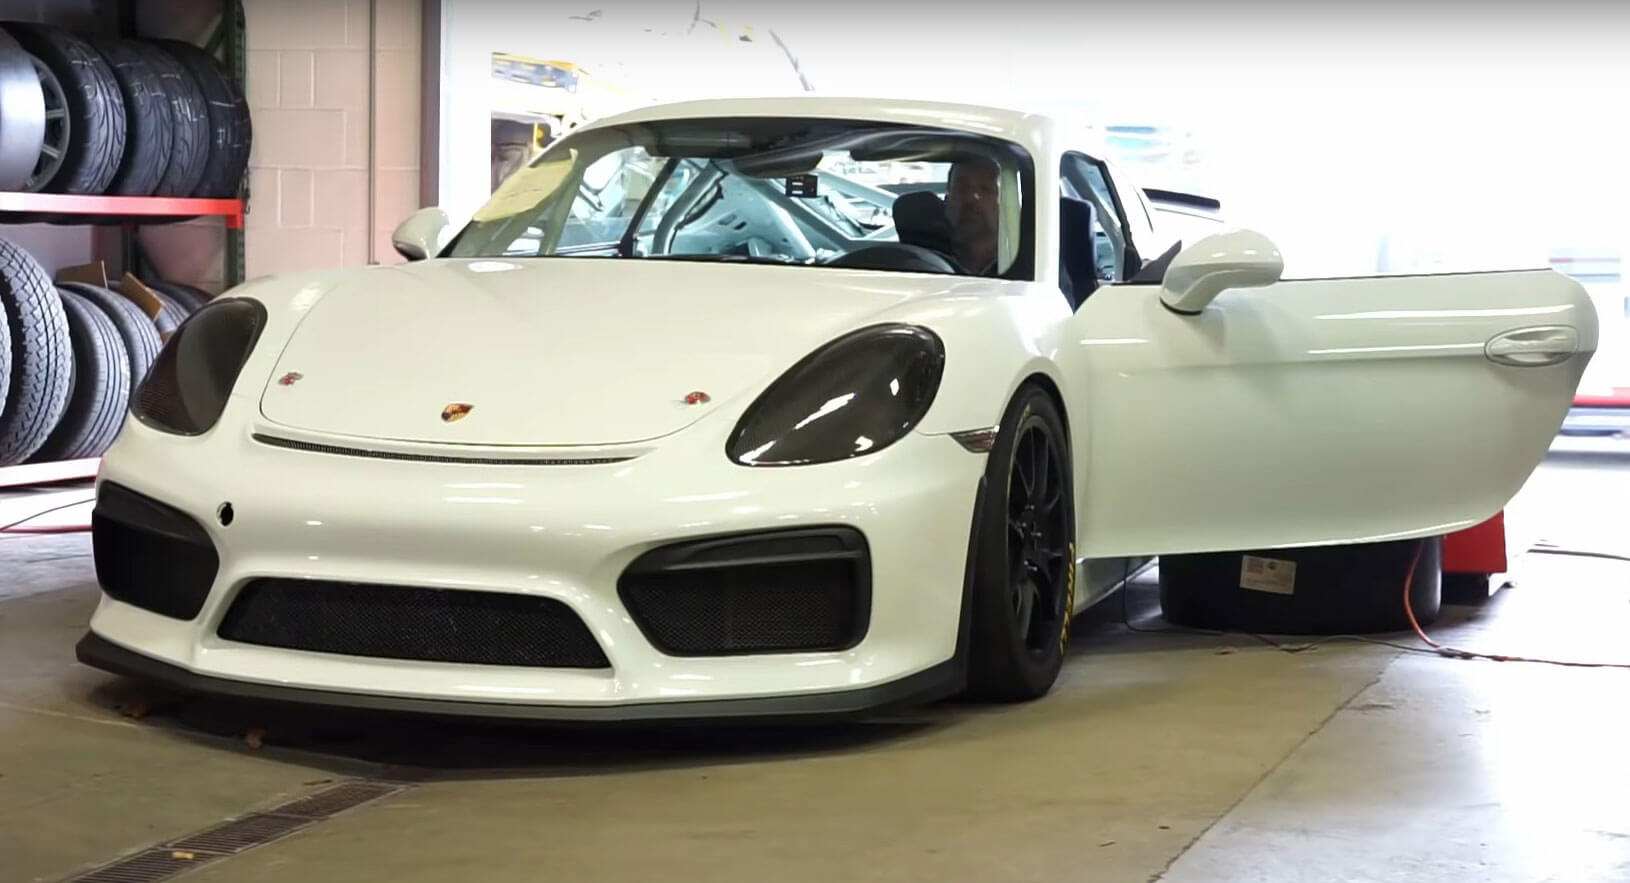 Porsche Cayman Gt4 Gets Tuned To 488 Whp Remains Naturally